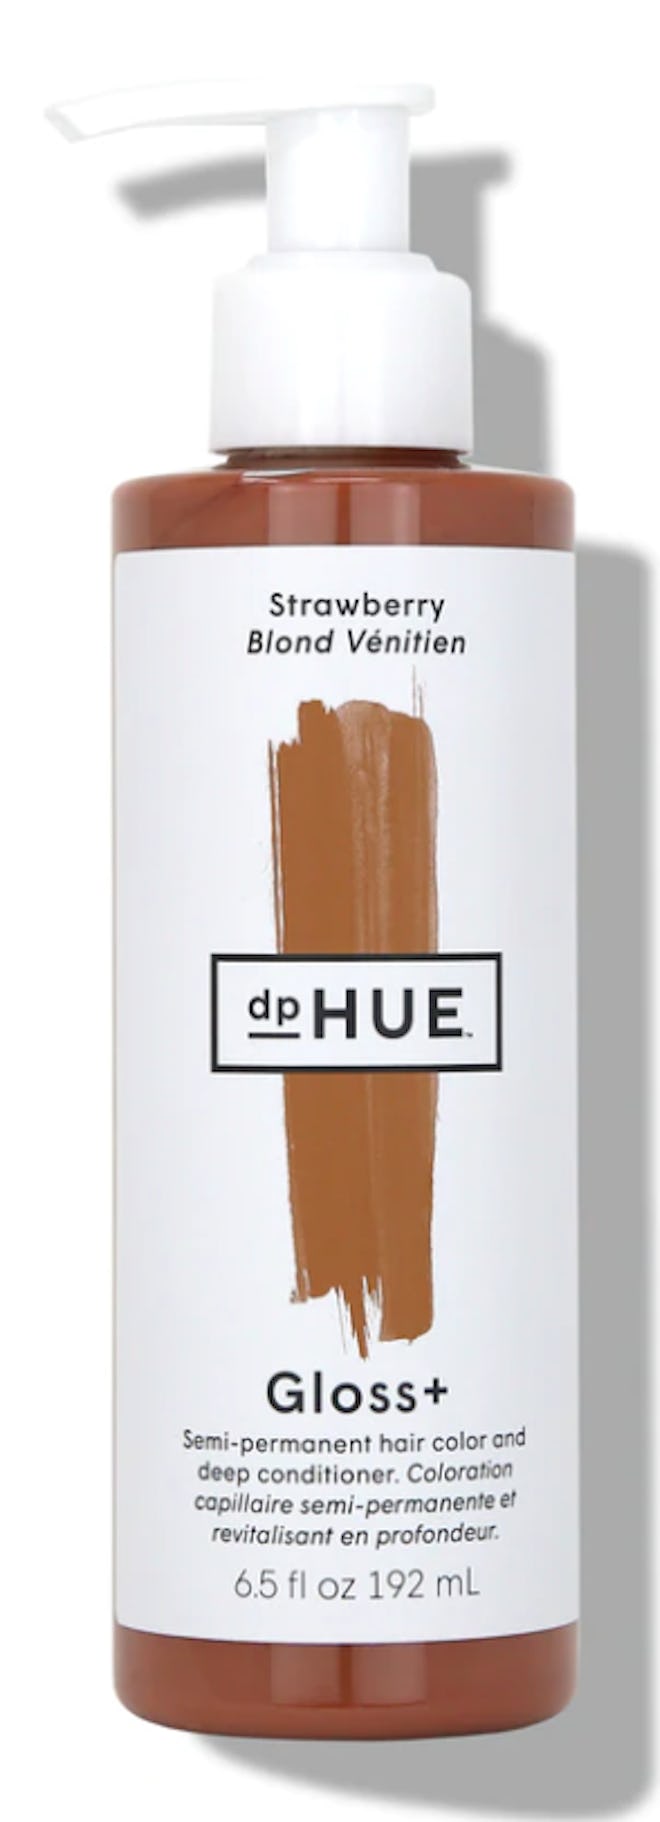 dpHUE Gloss+ Strawberry for red hair